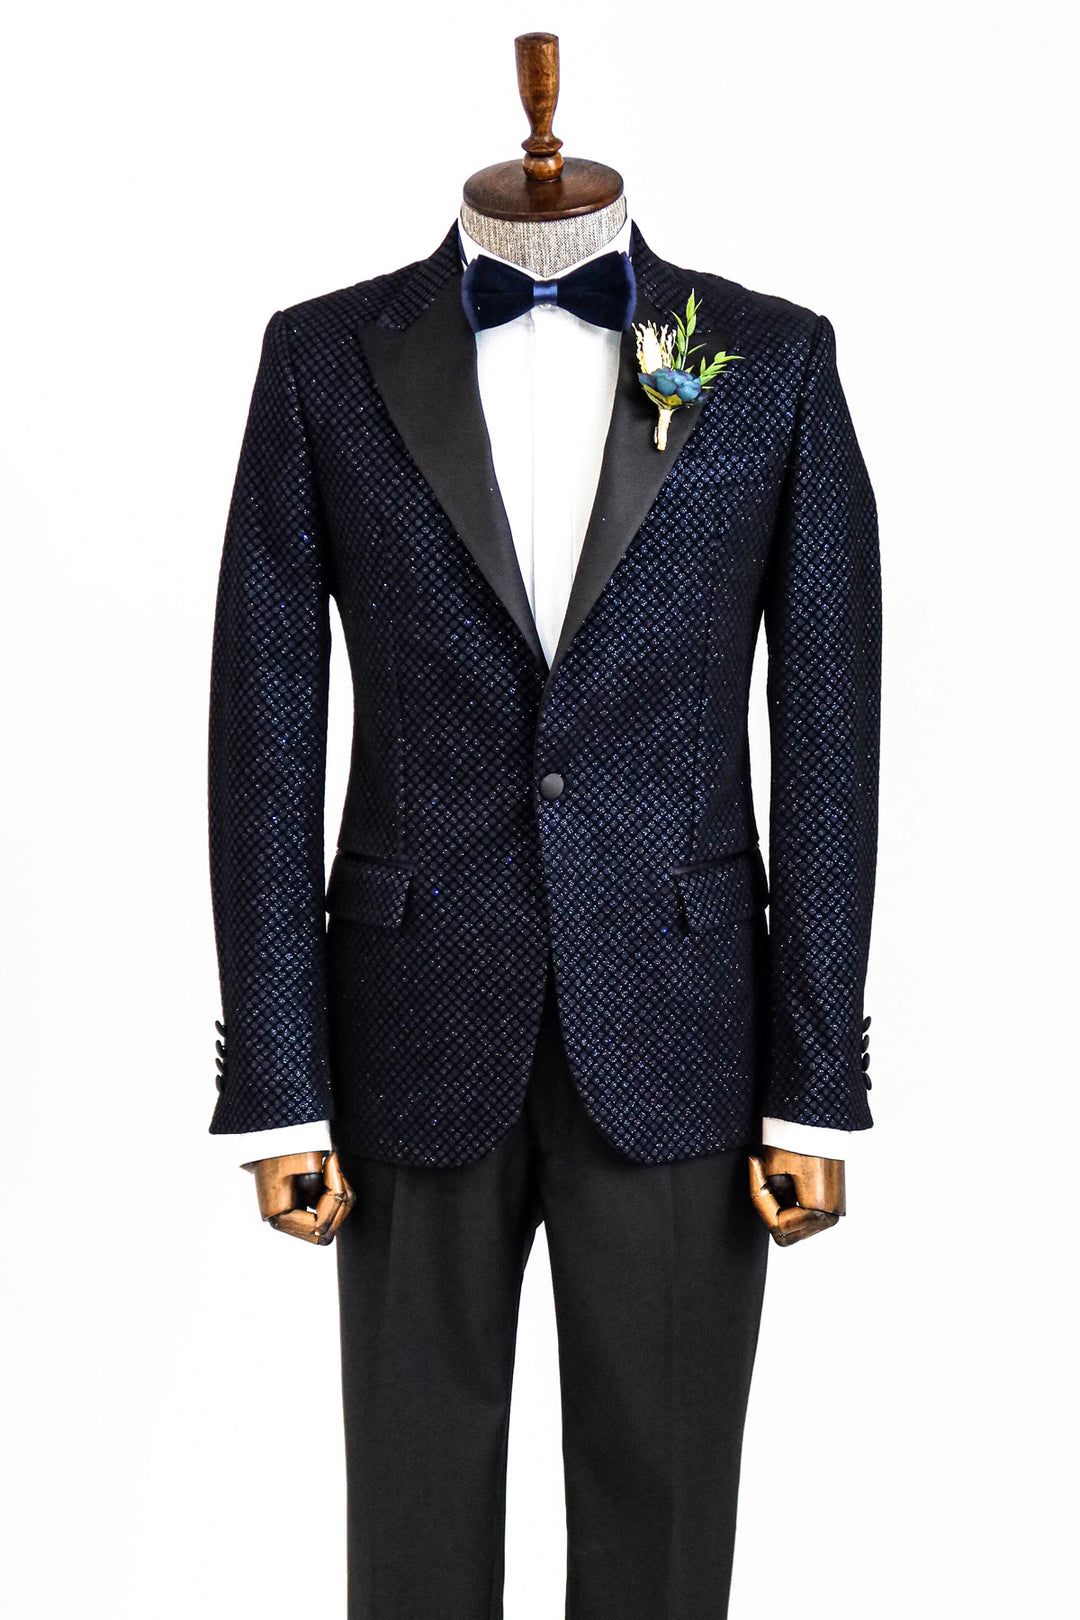 Black Patterned Over Navy Blue Men Prom Blazer and Trousers Combination- Wessi